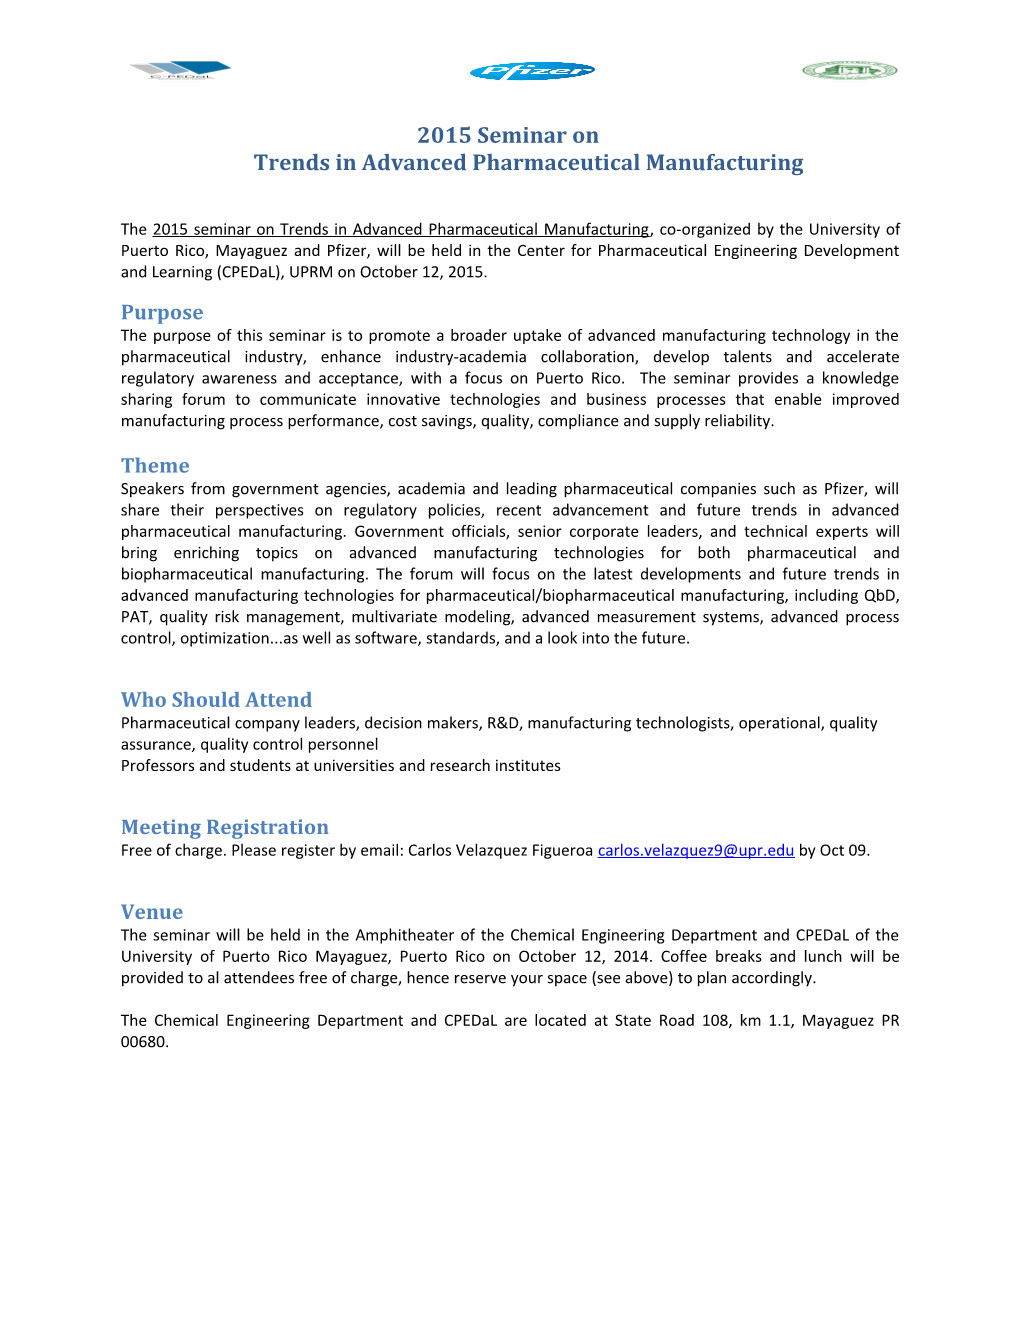 2015 Seminar on Trends in Advanced Pharmaceutical Manufacturing